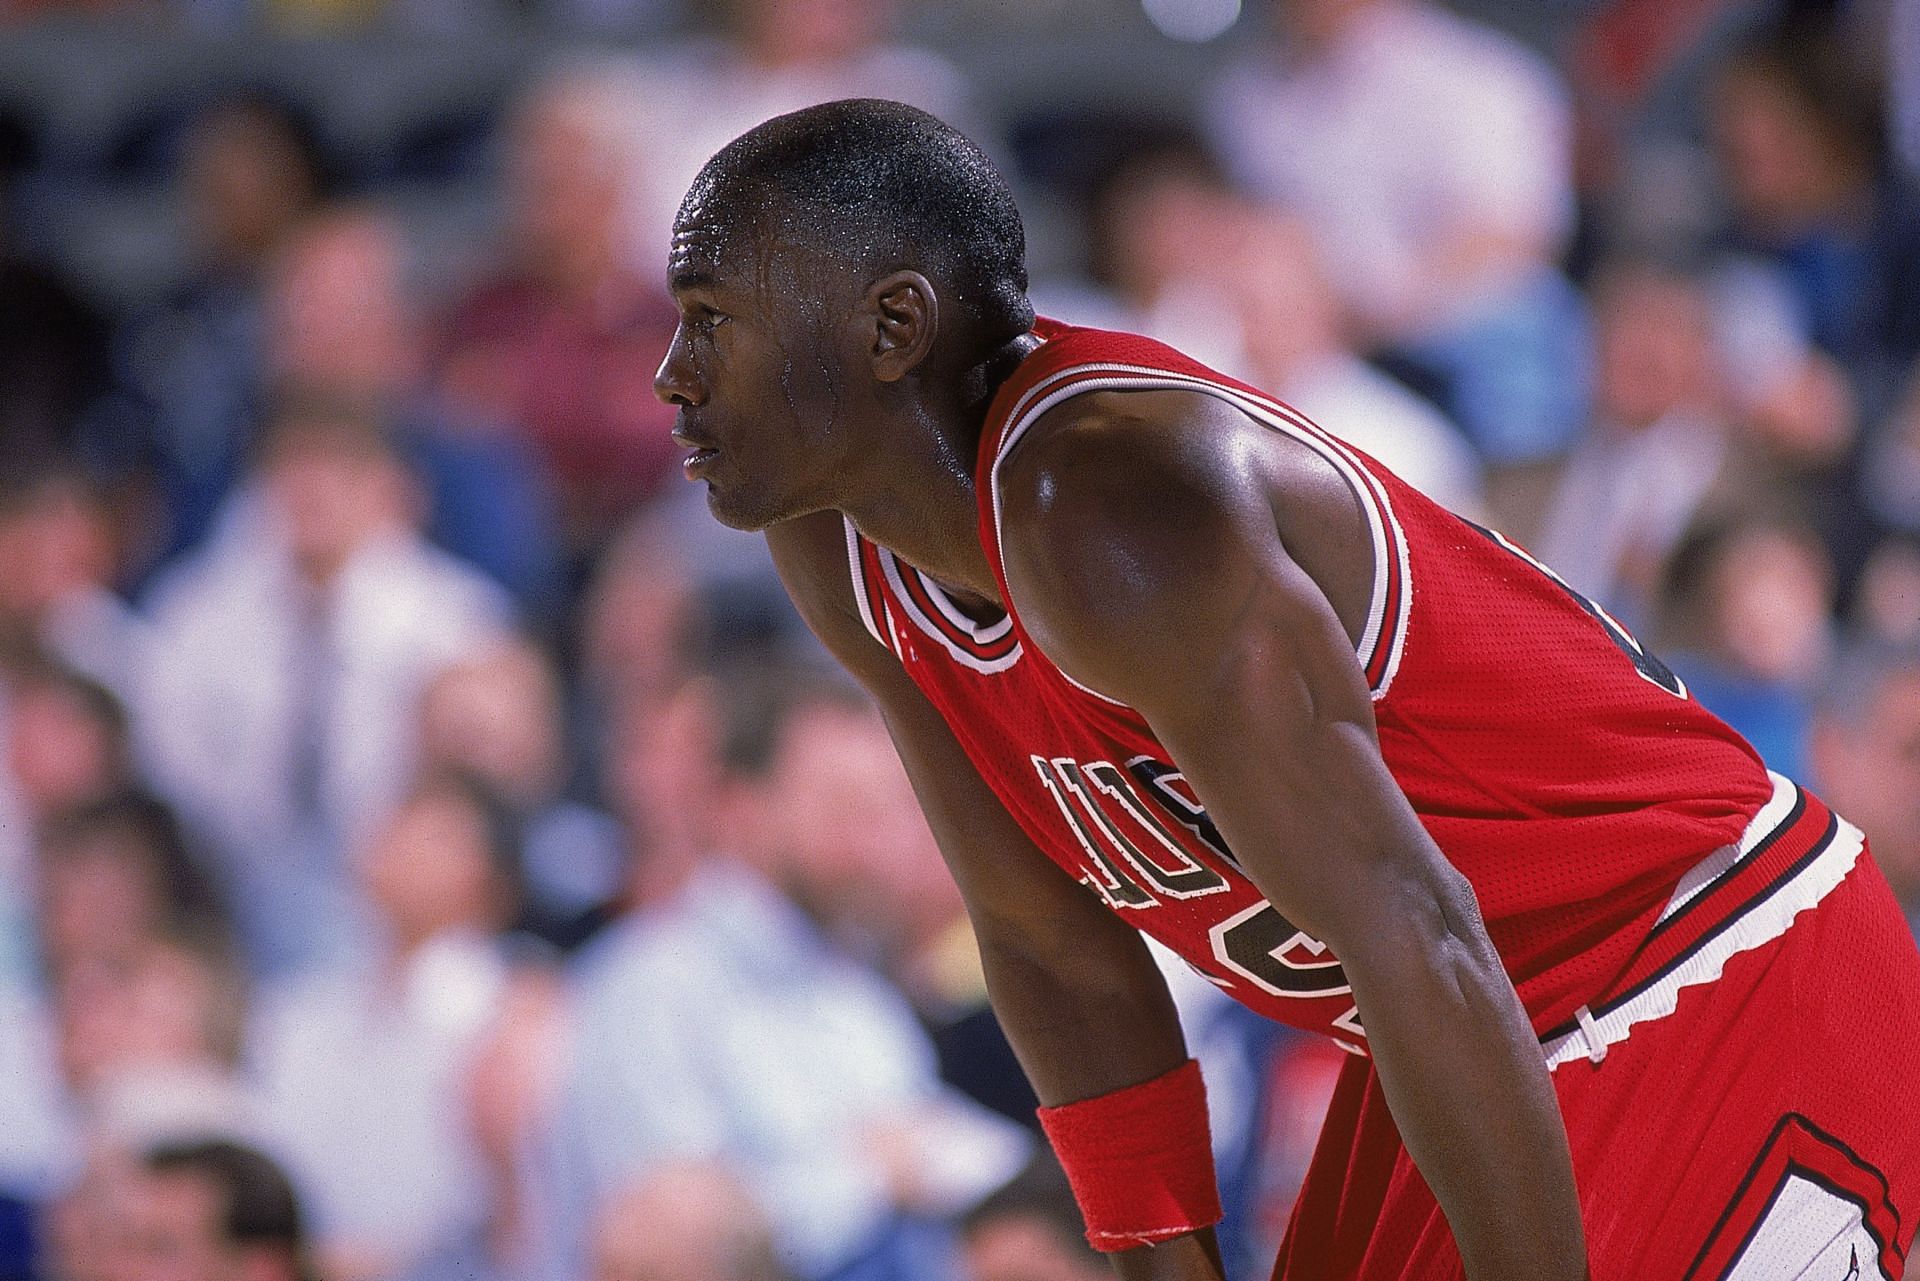 Michael Jordan #23 of the Chicago Bulls rests on the court during a game.